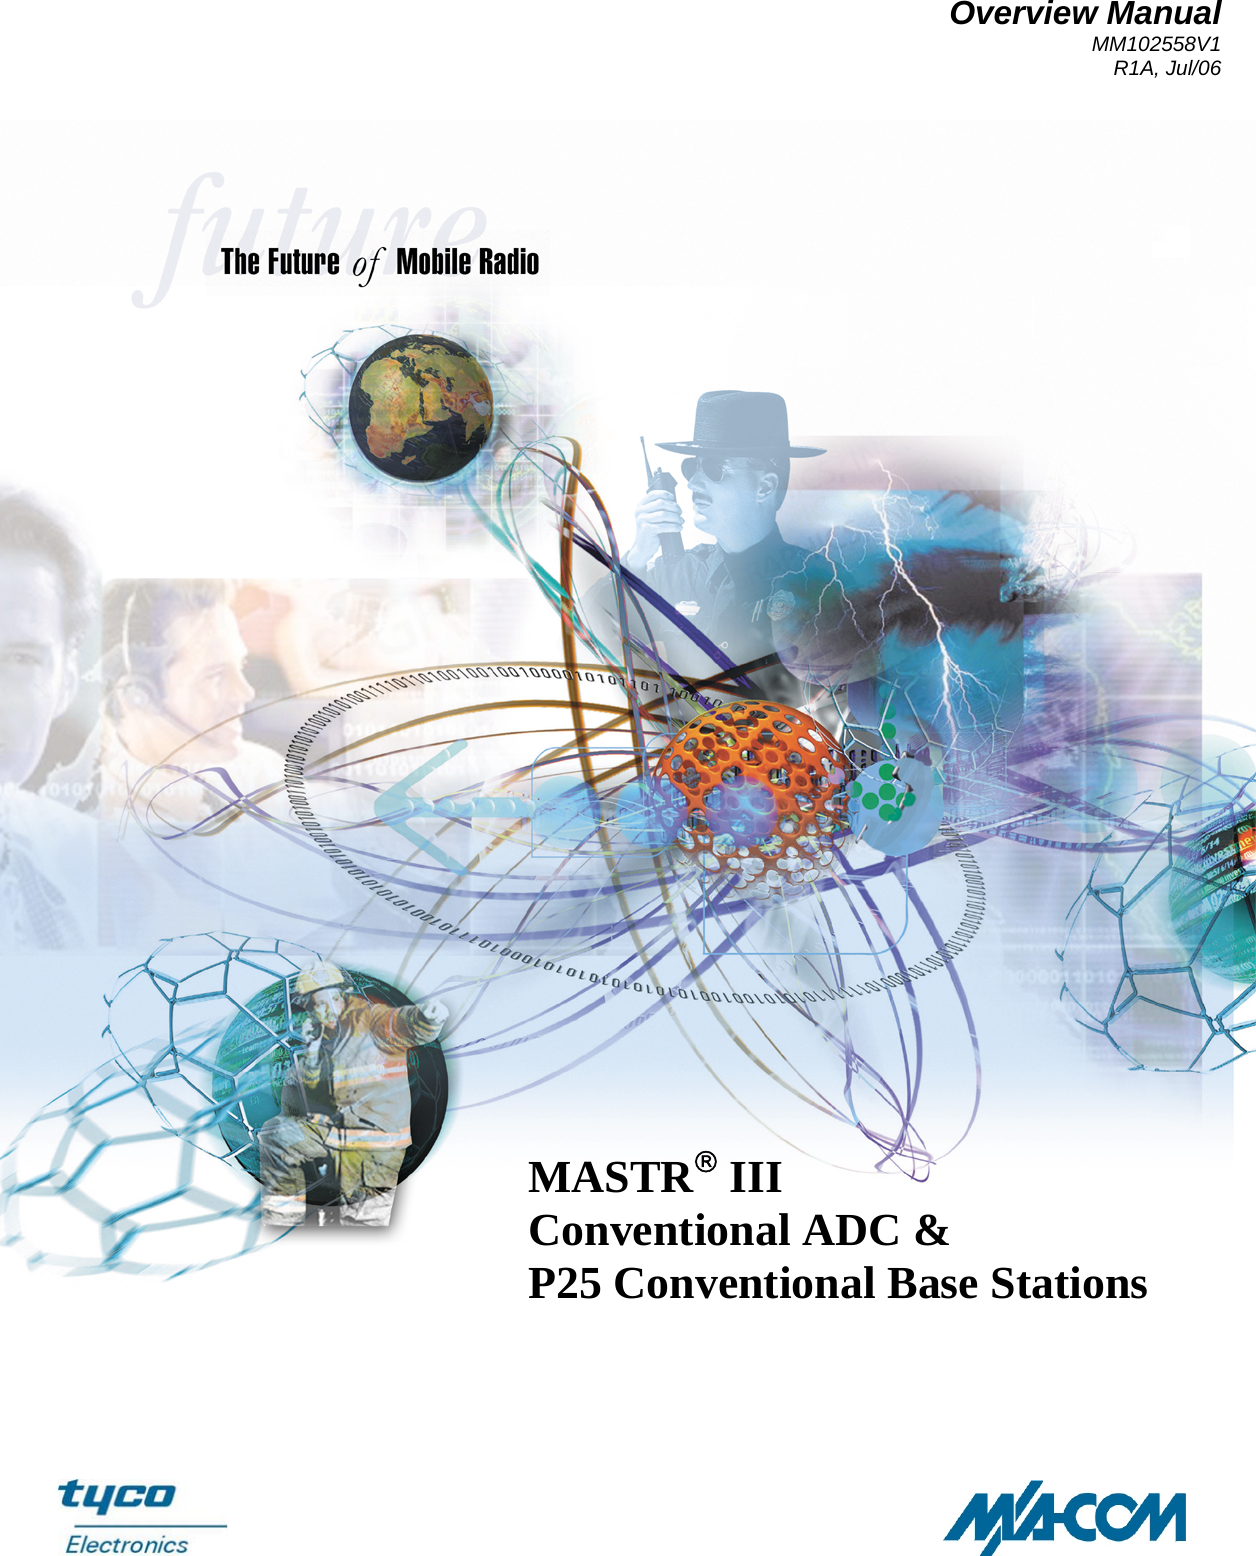 Overview Manual MM102558V1 R1A, Jul/06 MASTR® III Conventional ADC &amp; P25 Conventional Base Stations  